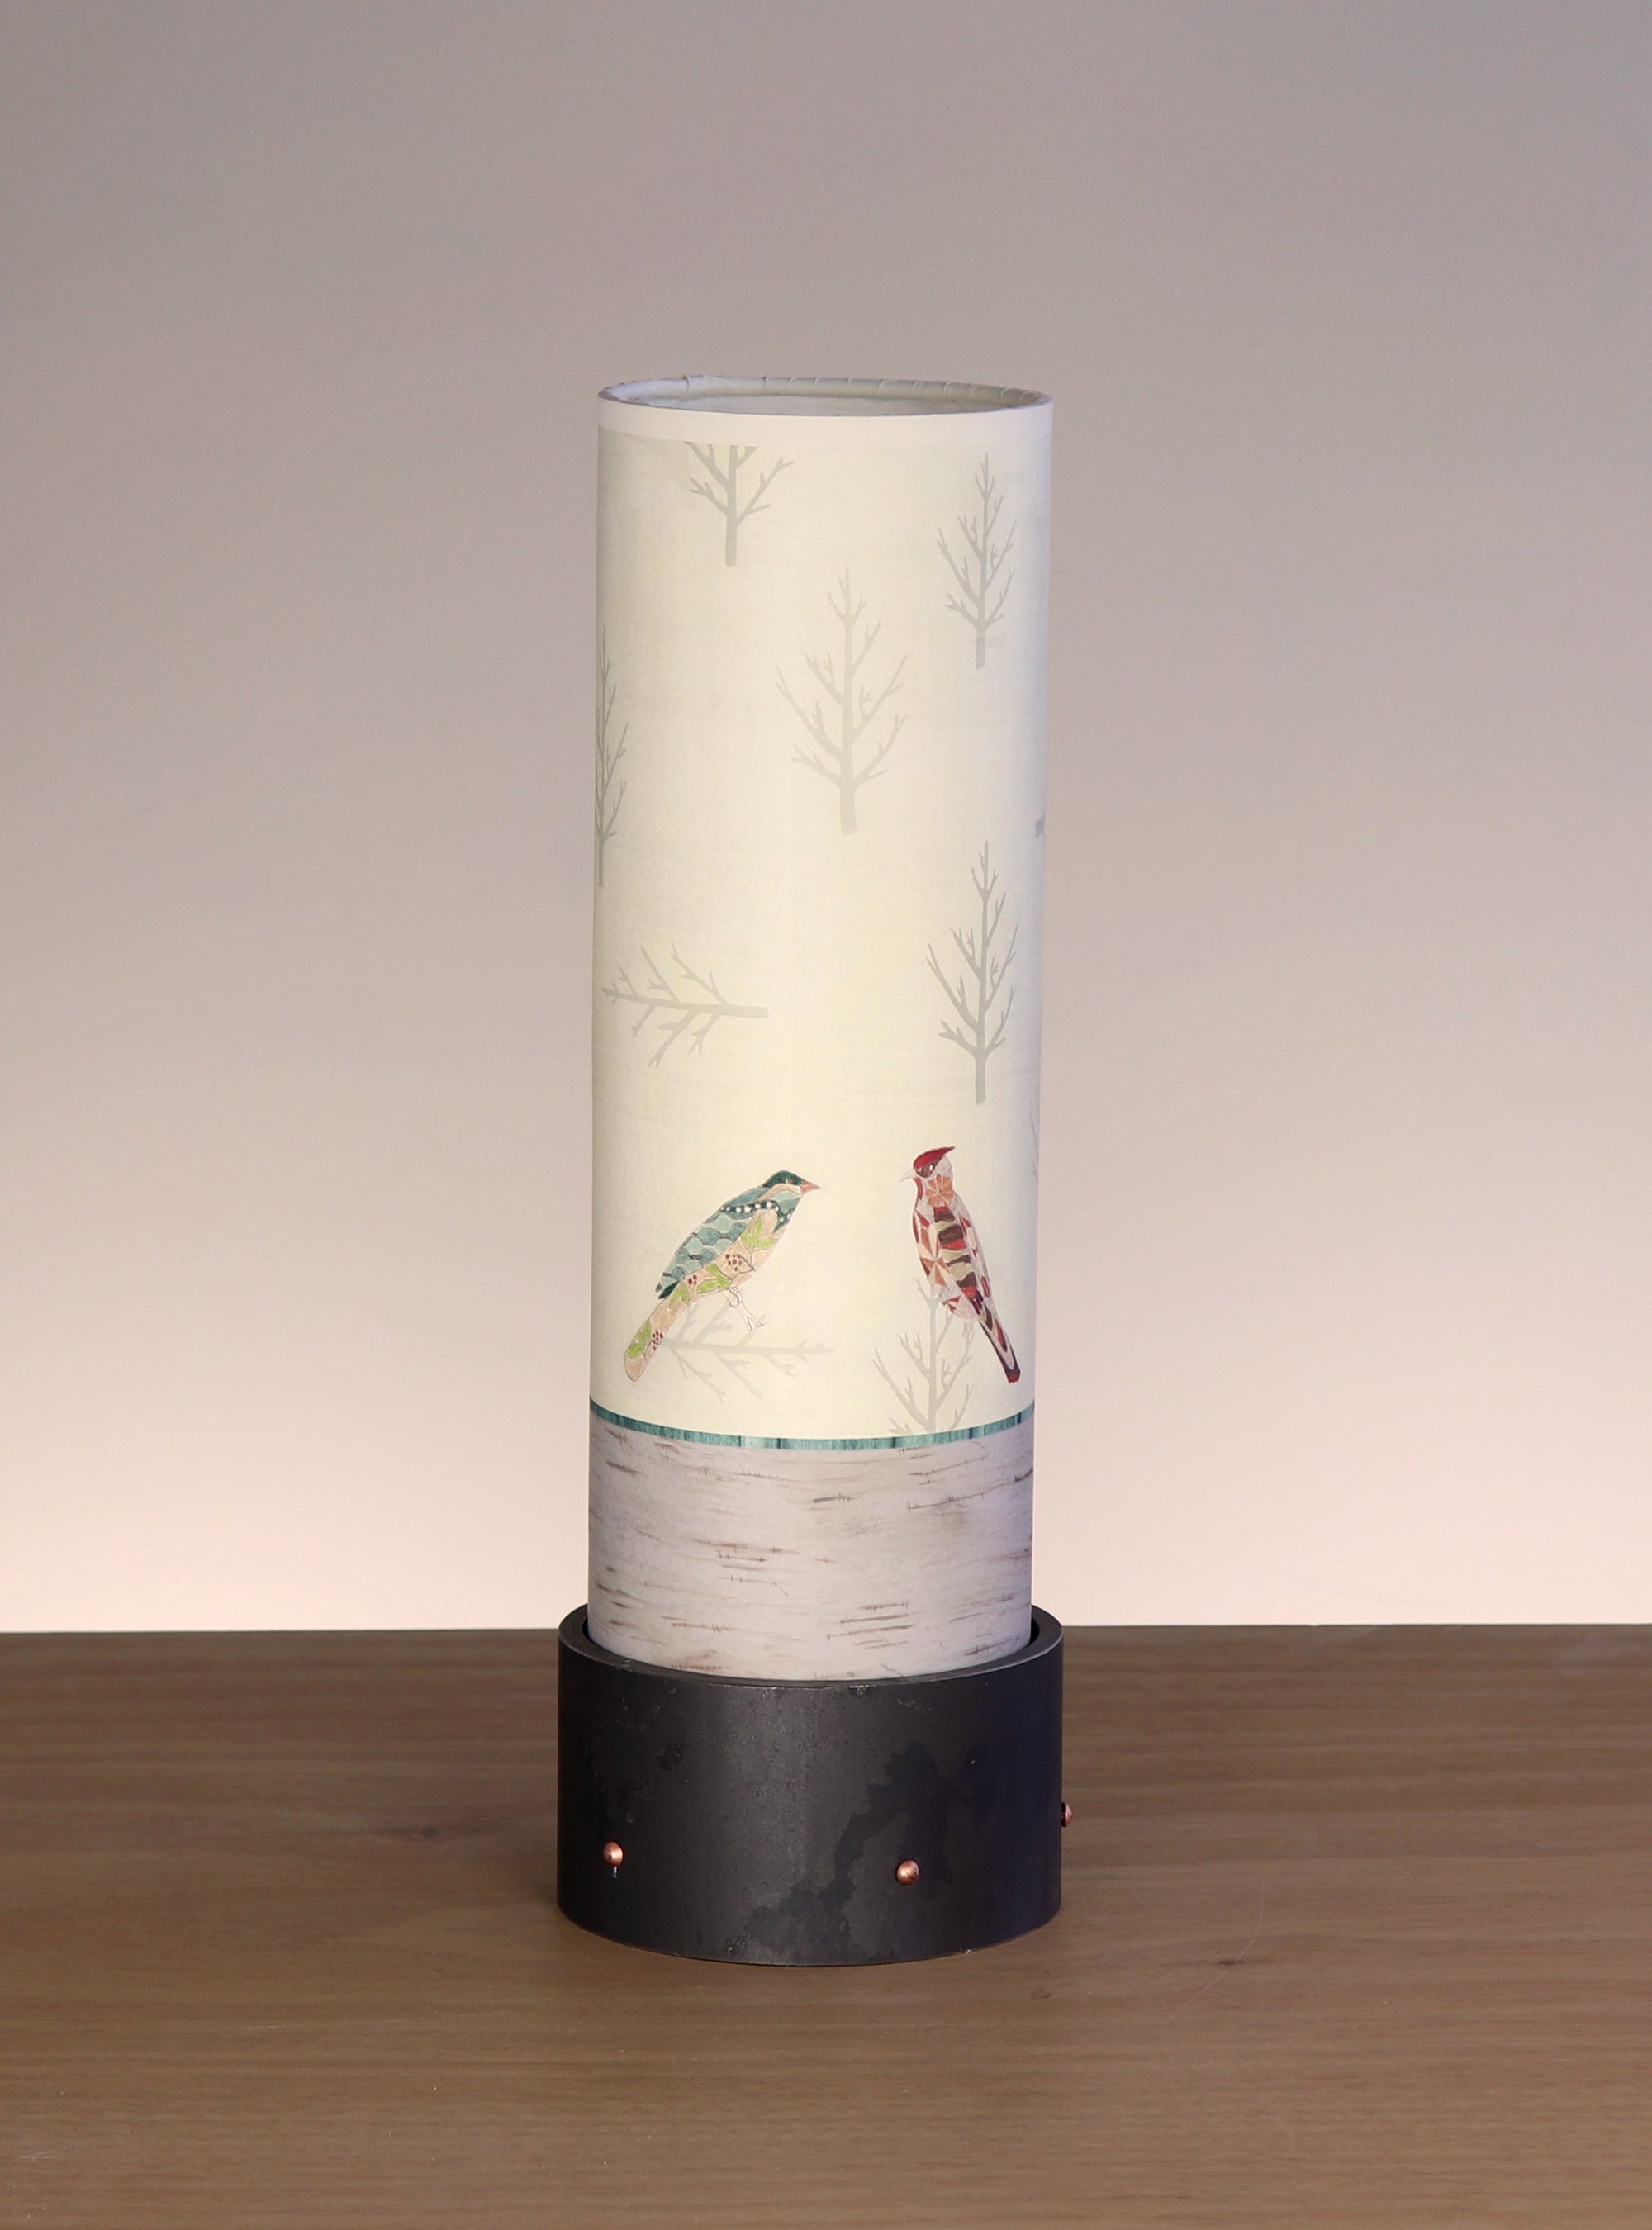 Janna Ugone & Co Luminaires Steel Luminaire Accent Lamp with Bird Friends Shade